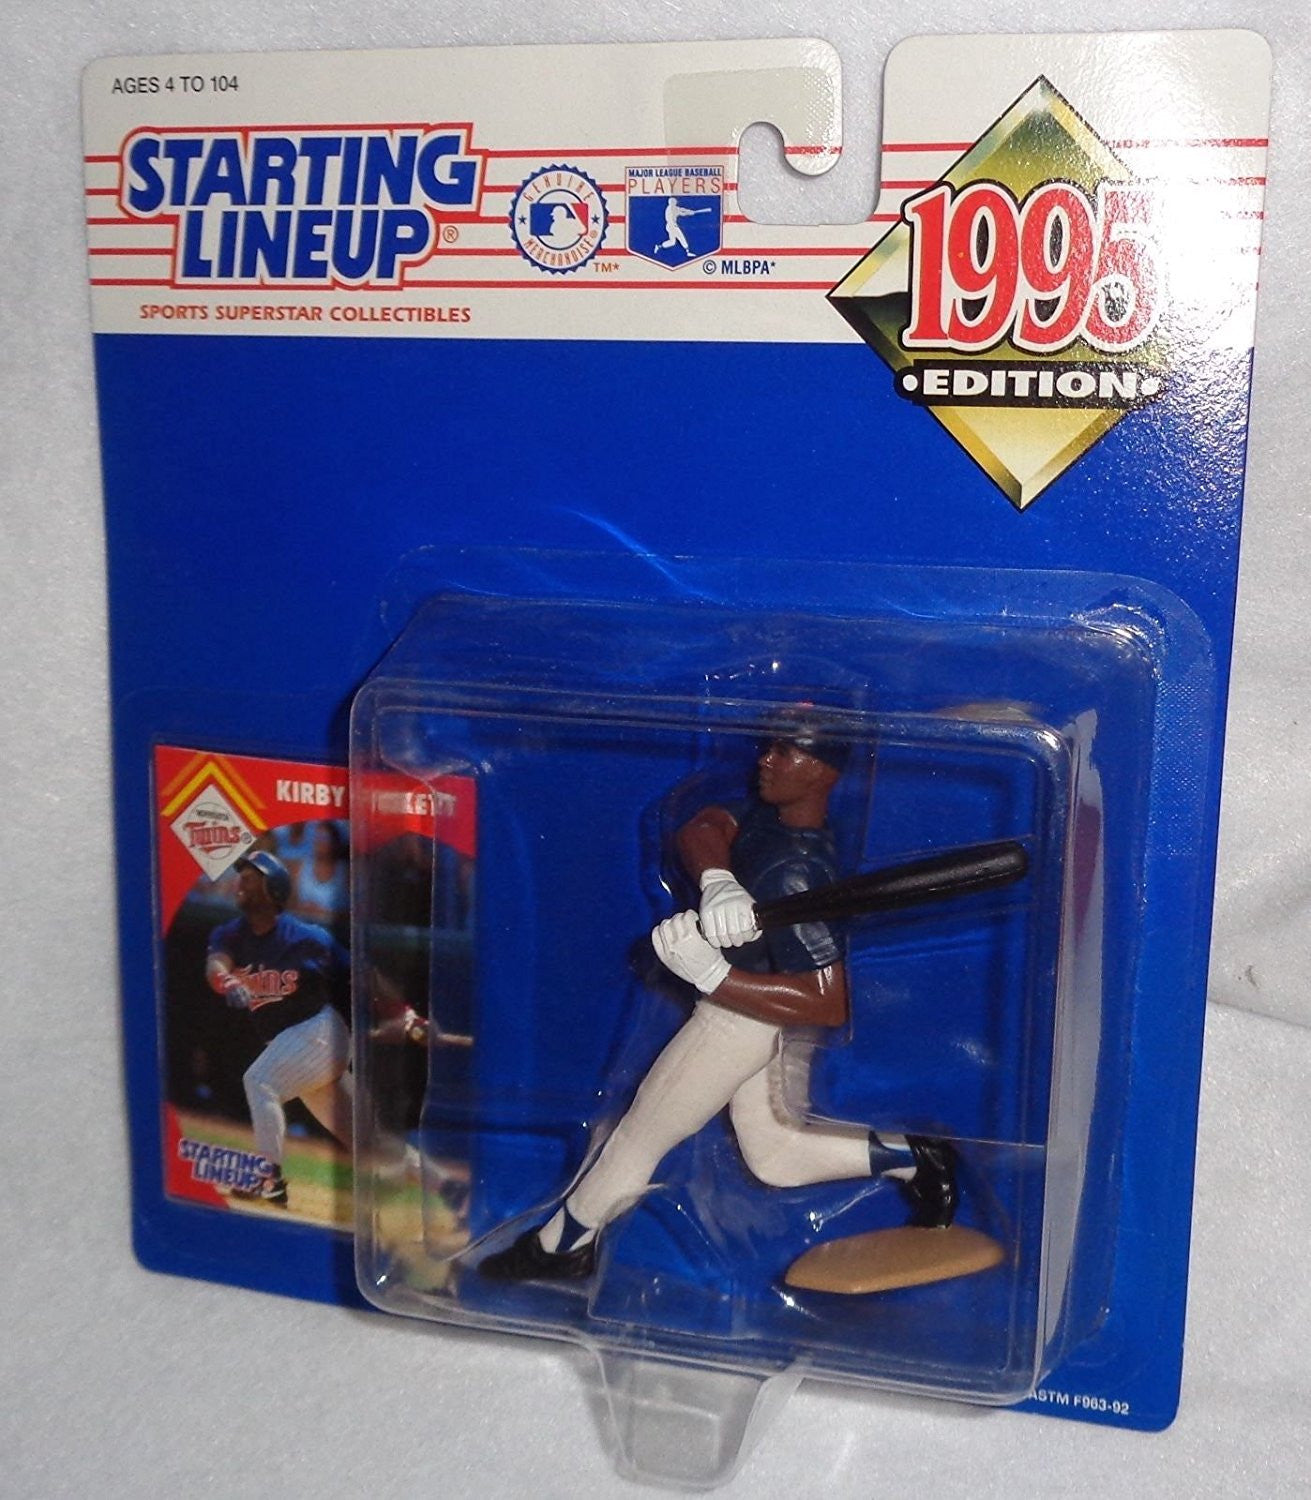 1995 Starting Lineup MLB Kirby Puckett #34 - Minnesota Twins - Vintage Action Figure - w/ Trading Card - Limited Edition - Collectible